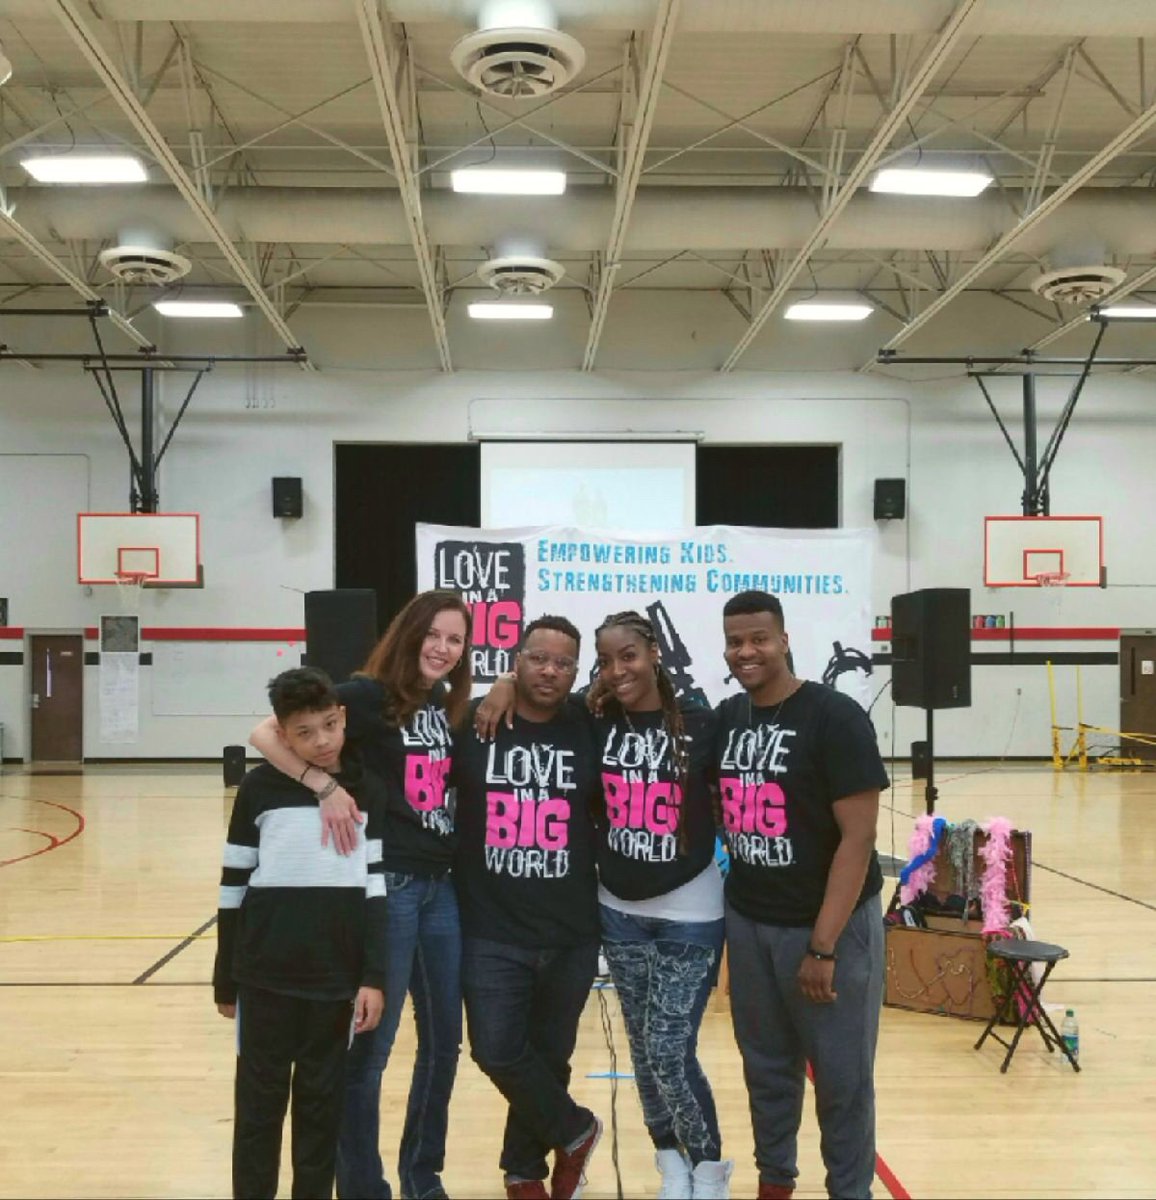 Here's a quick #throwbackthursday to Monday's assembly at @JereBaxterMP with @MOVE2STAND. The students had the most positive energy and the day was simply amazing! #SEL